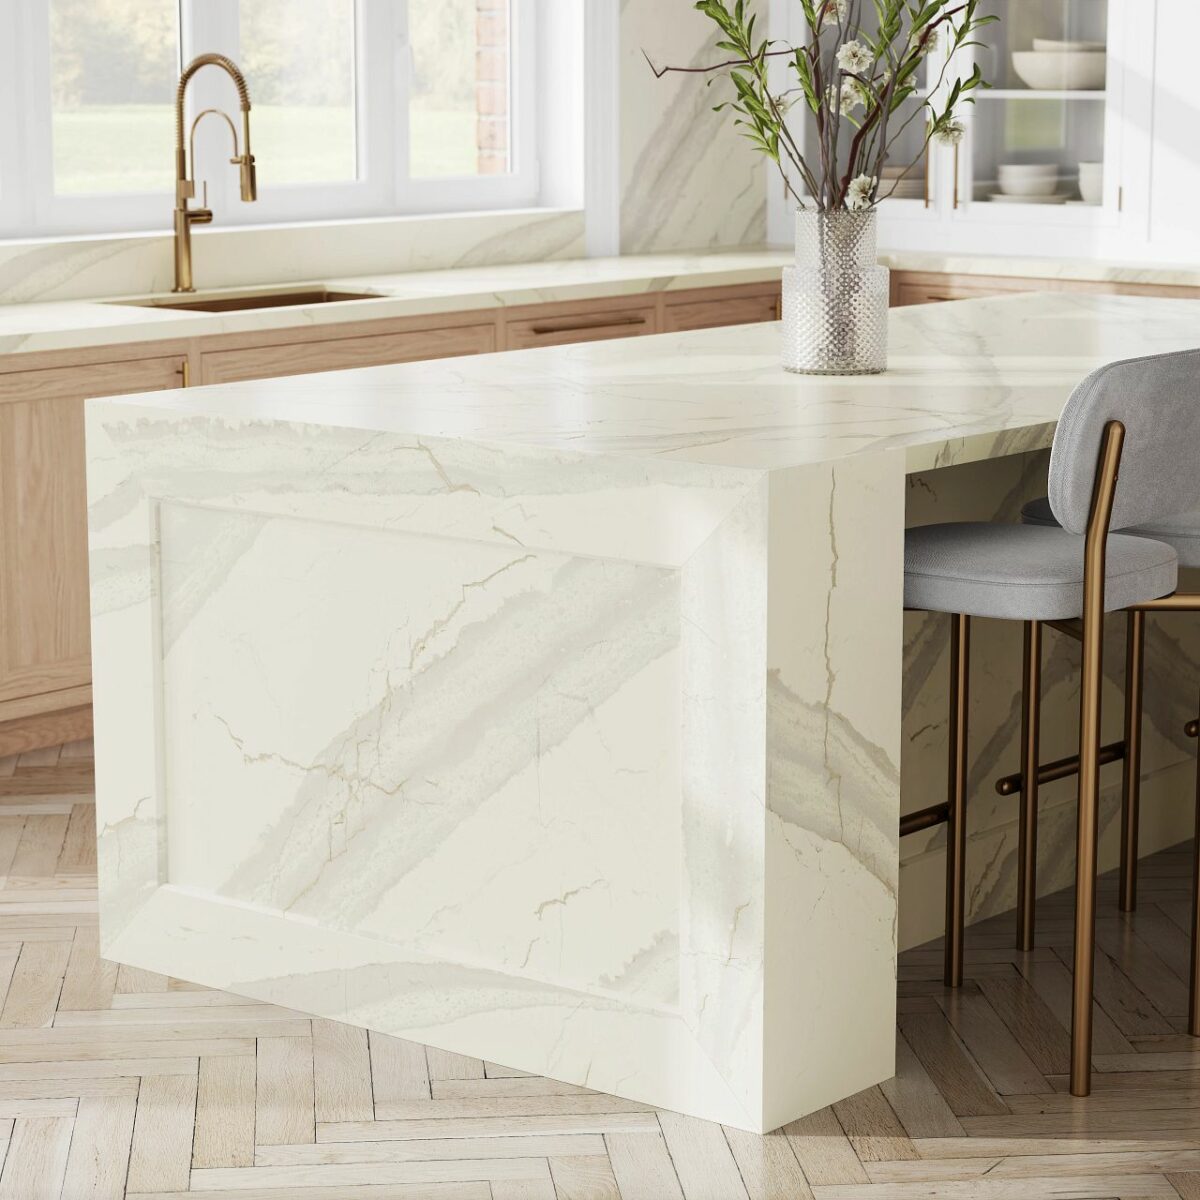 A close-up view of Cambria Inverness Swansea Quartz, showcasing its tonal white, marbled design with intricate debossed Inverness veins. Available in both high gloss and Cambria Matte finishes installed kitchen countertops